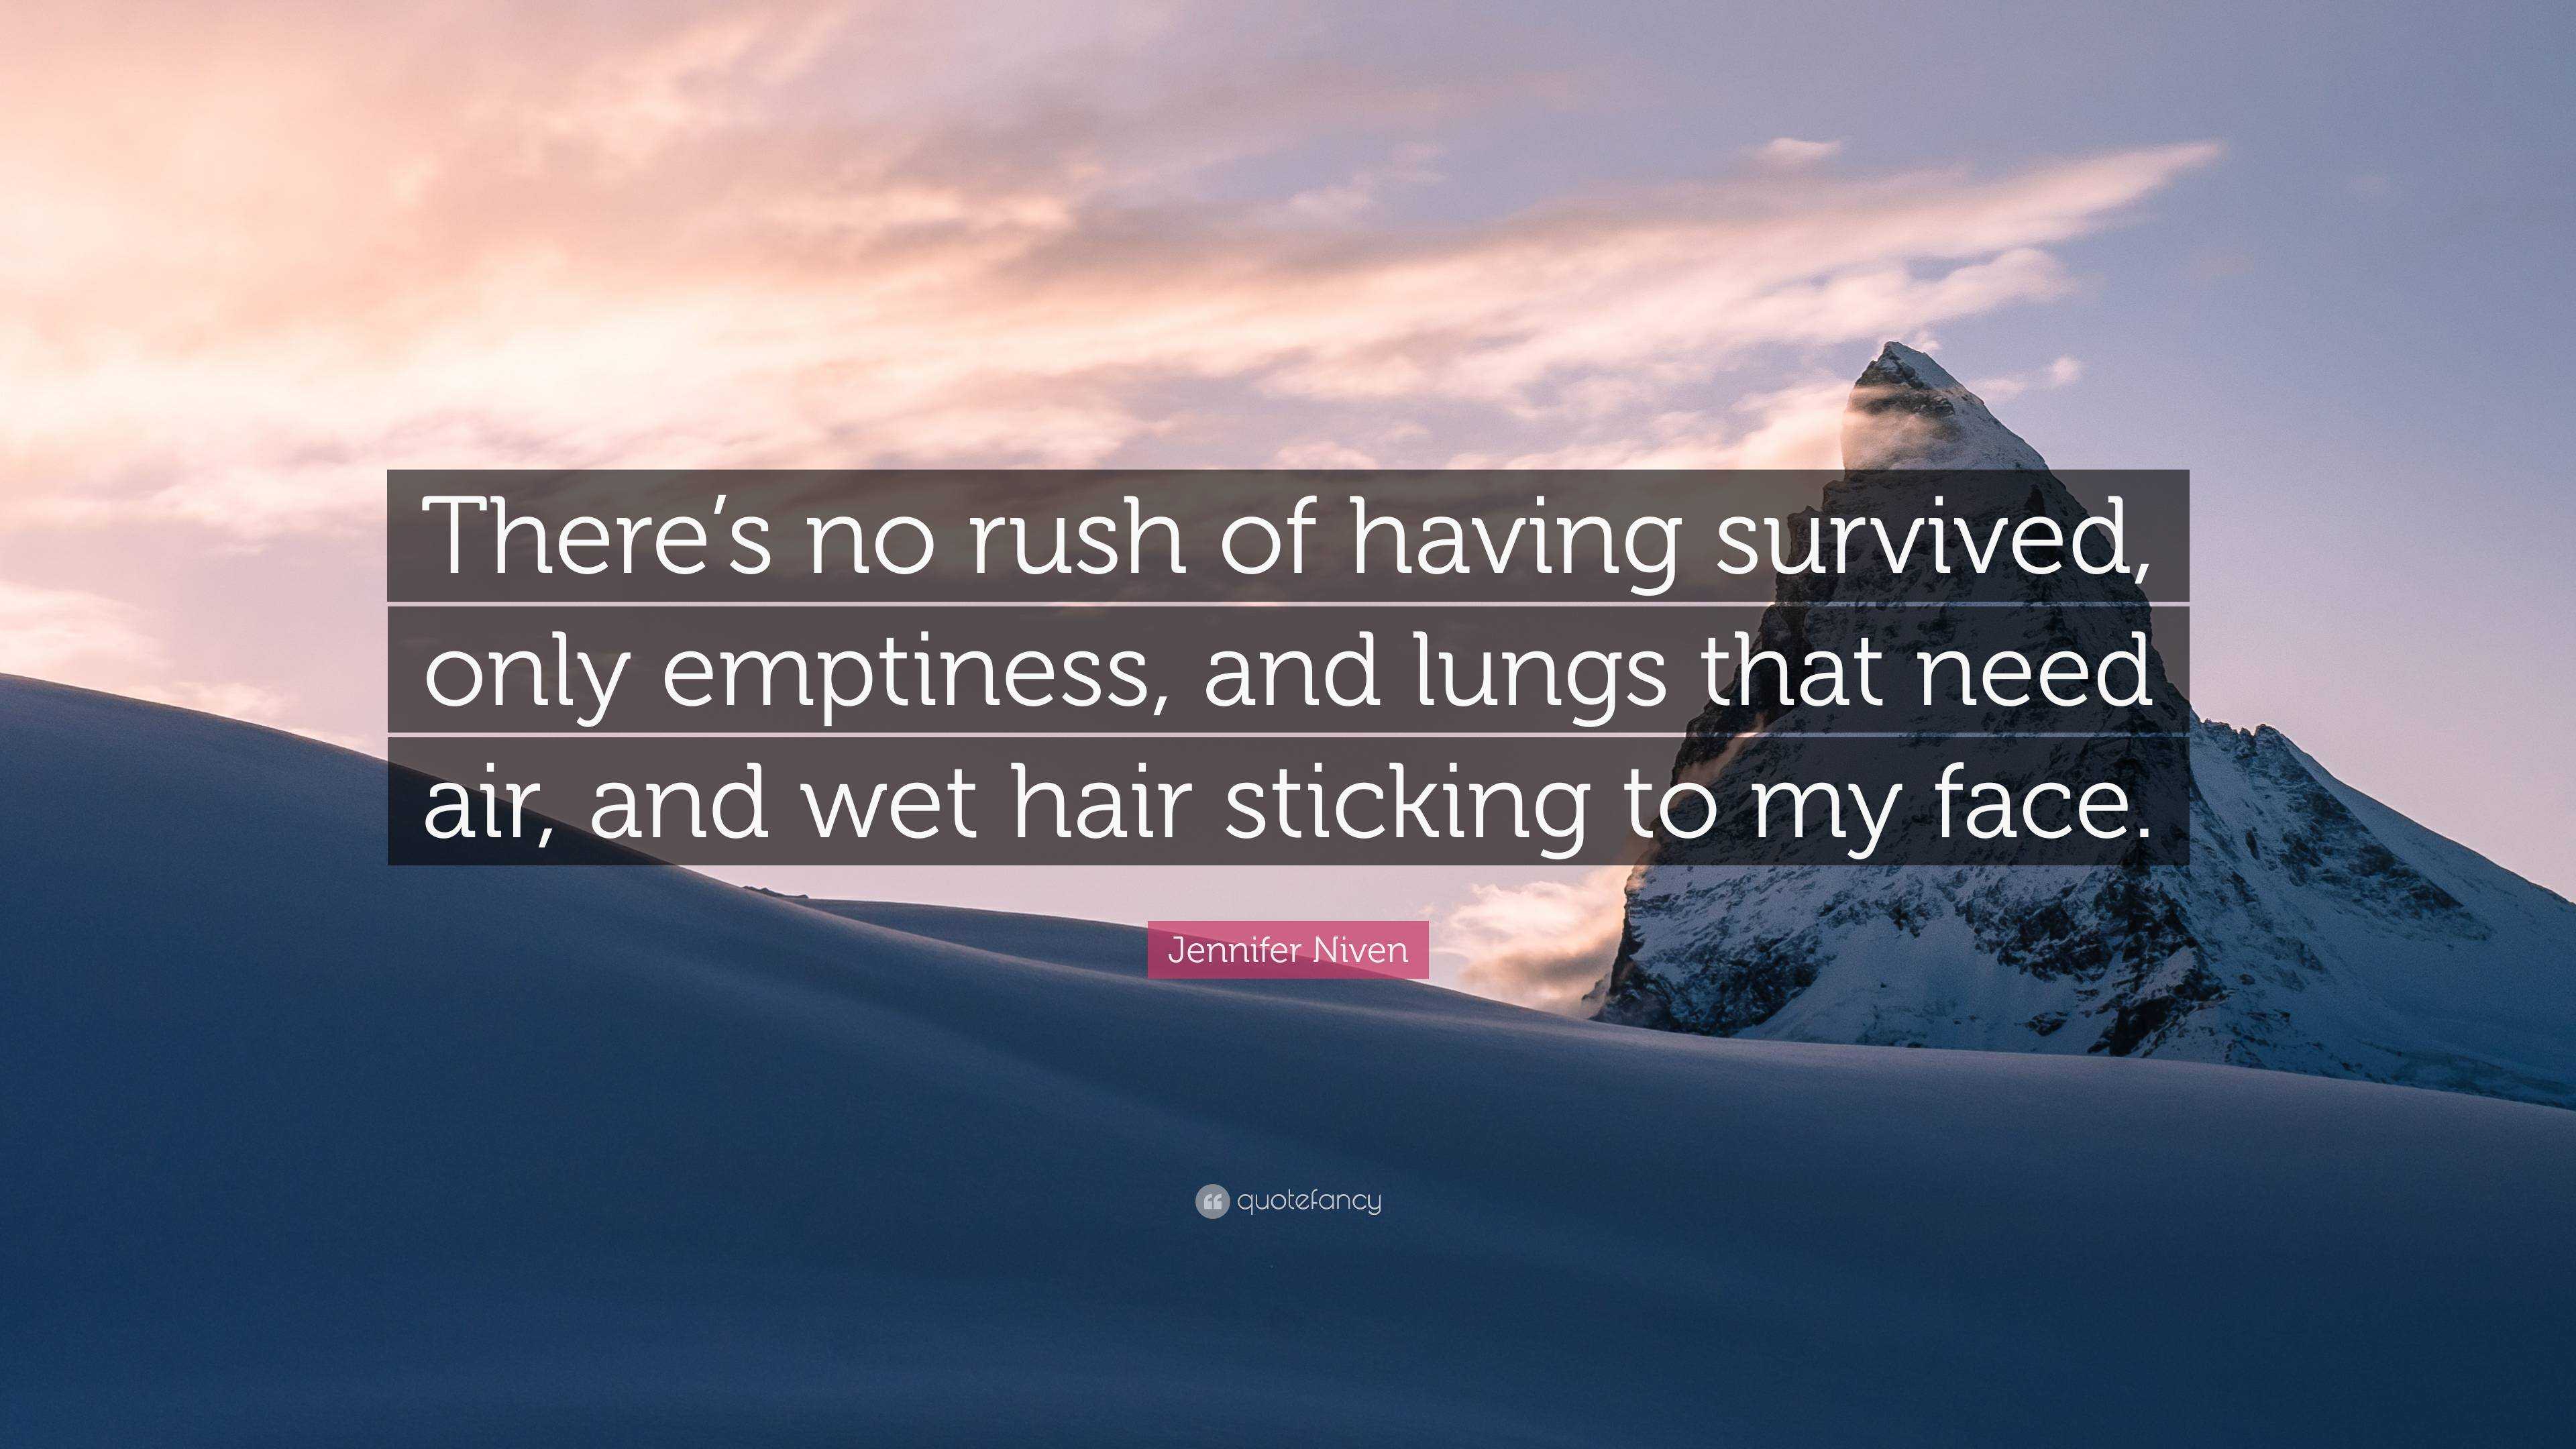 Jennifer Niven Quote: “There's no rush of having survived, only emptiness,  and lungs that need air,